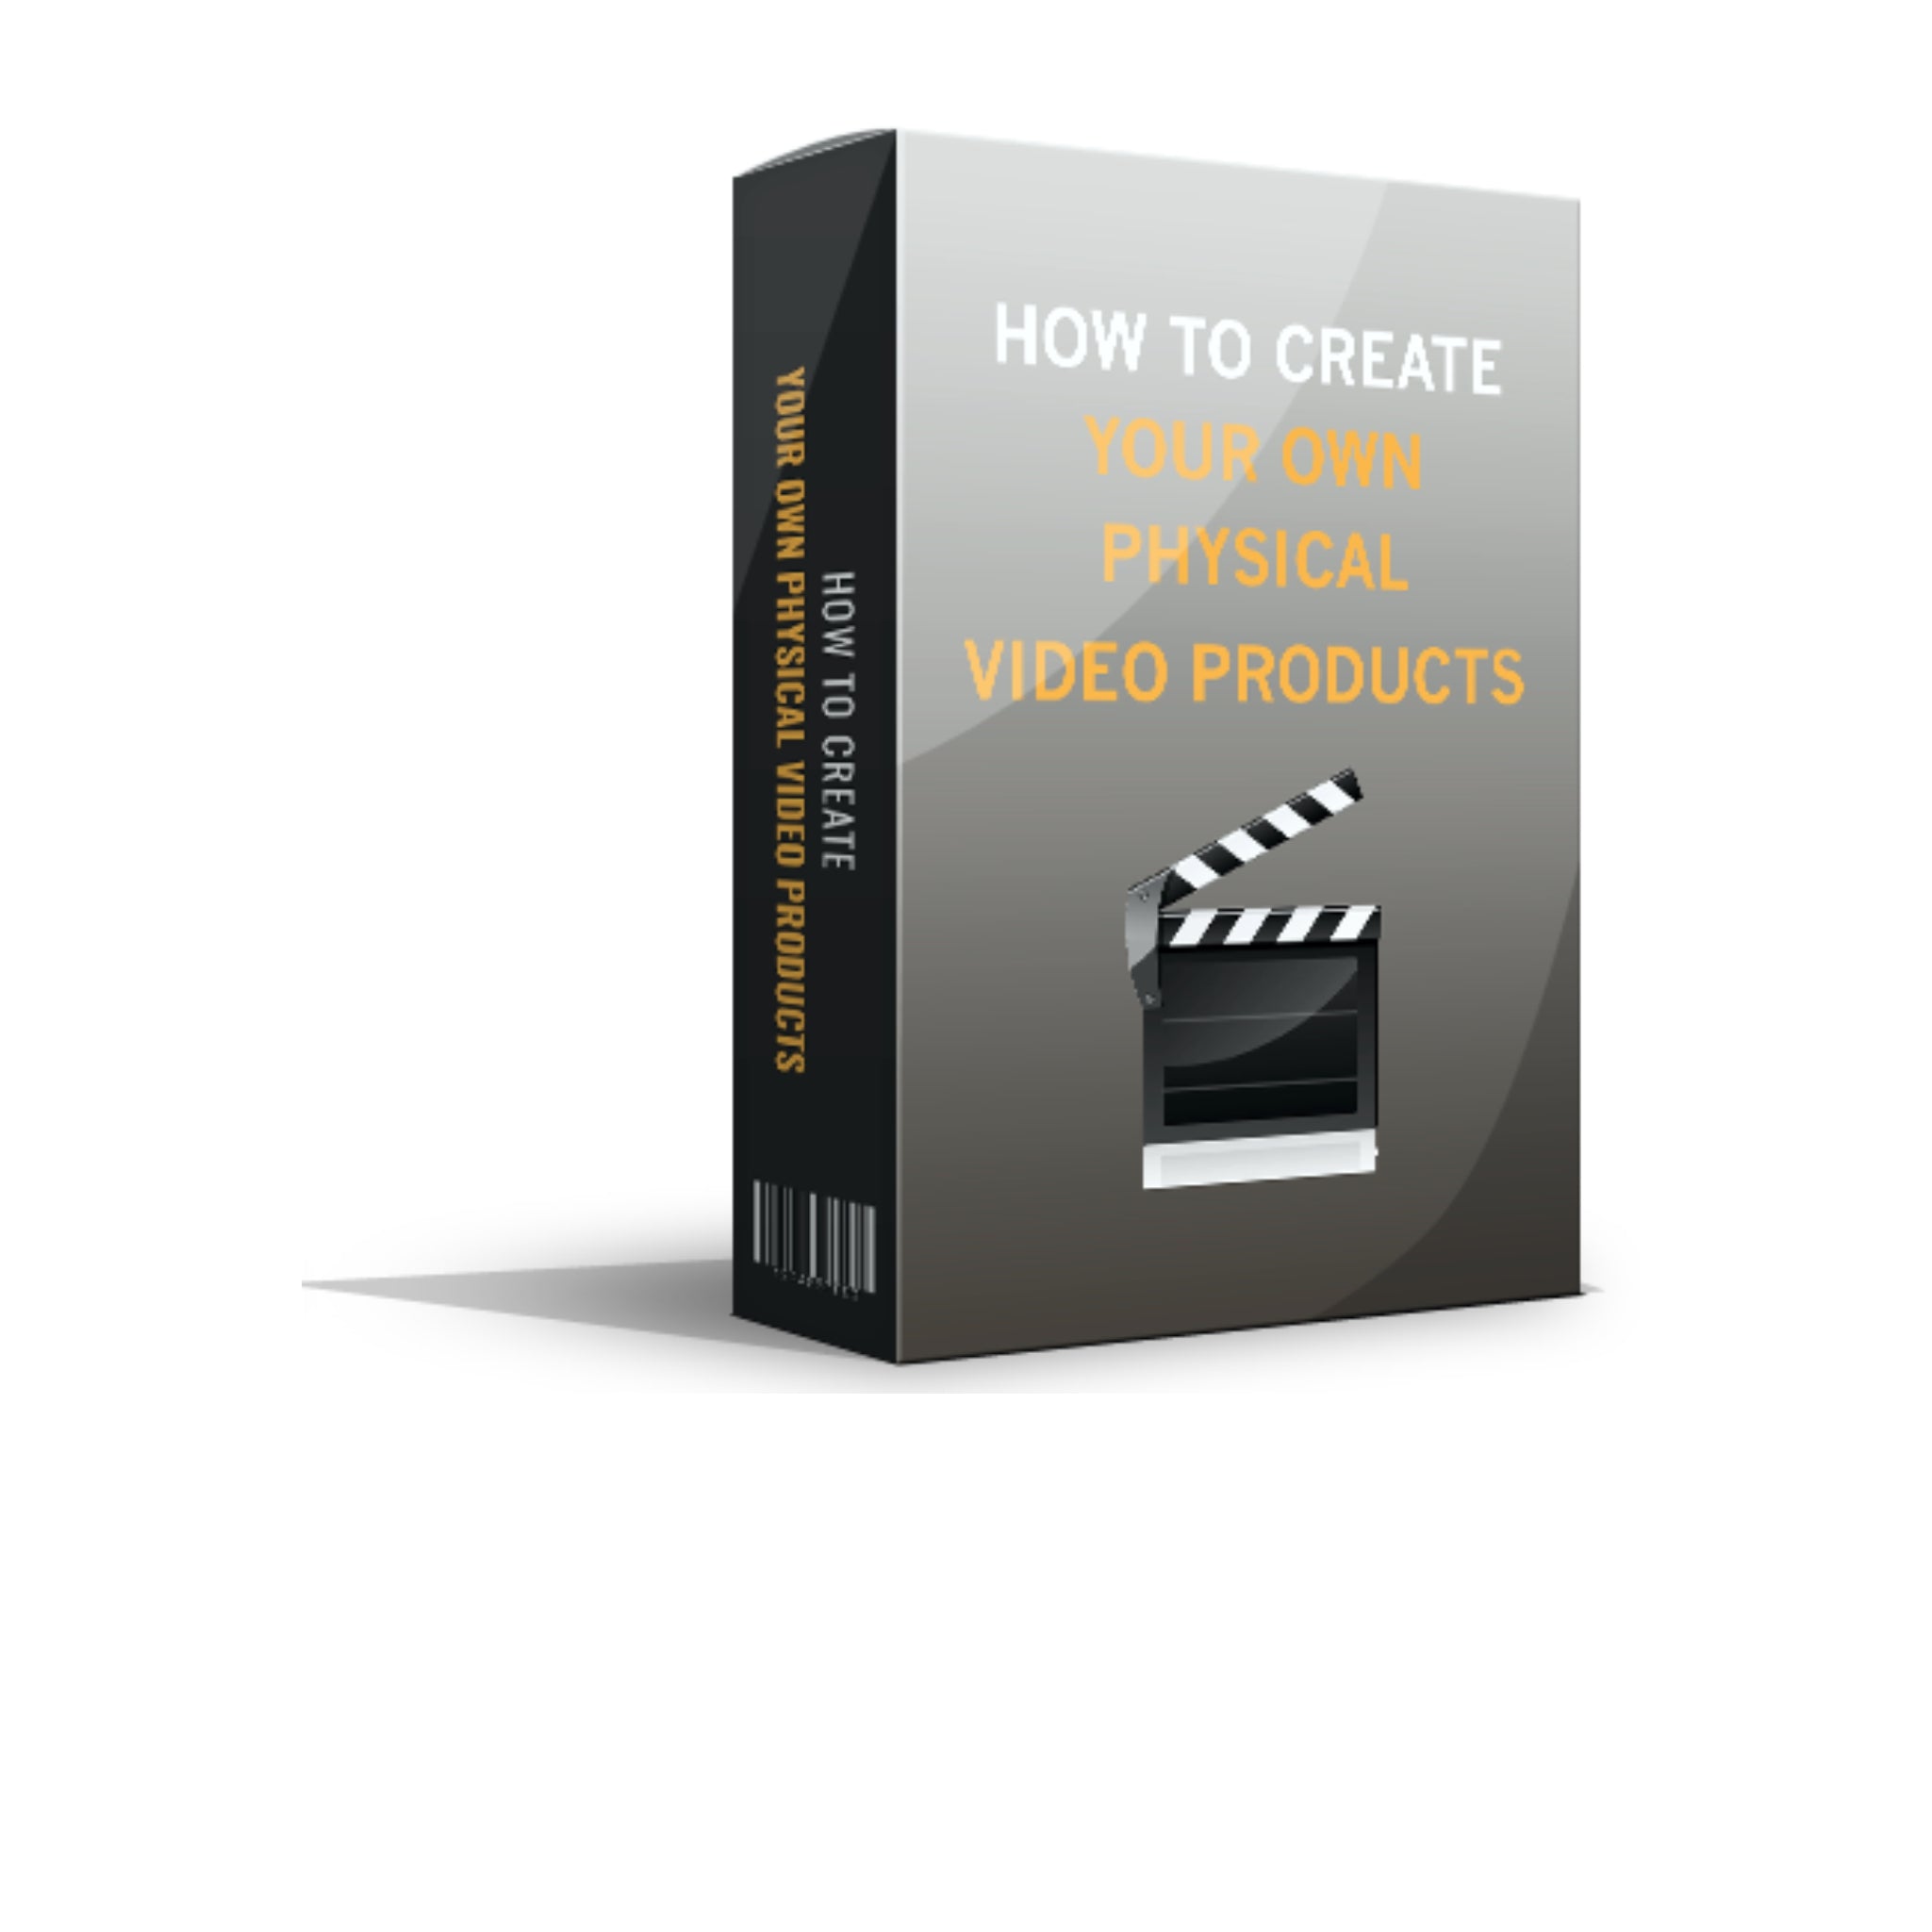 How To Create Your Own Physical Video Products Ebook